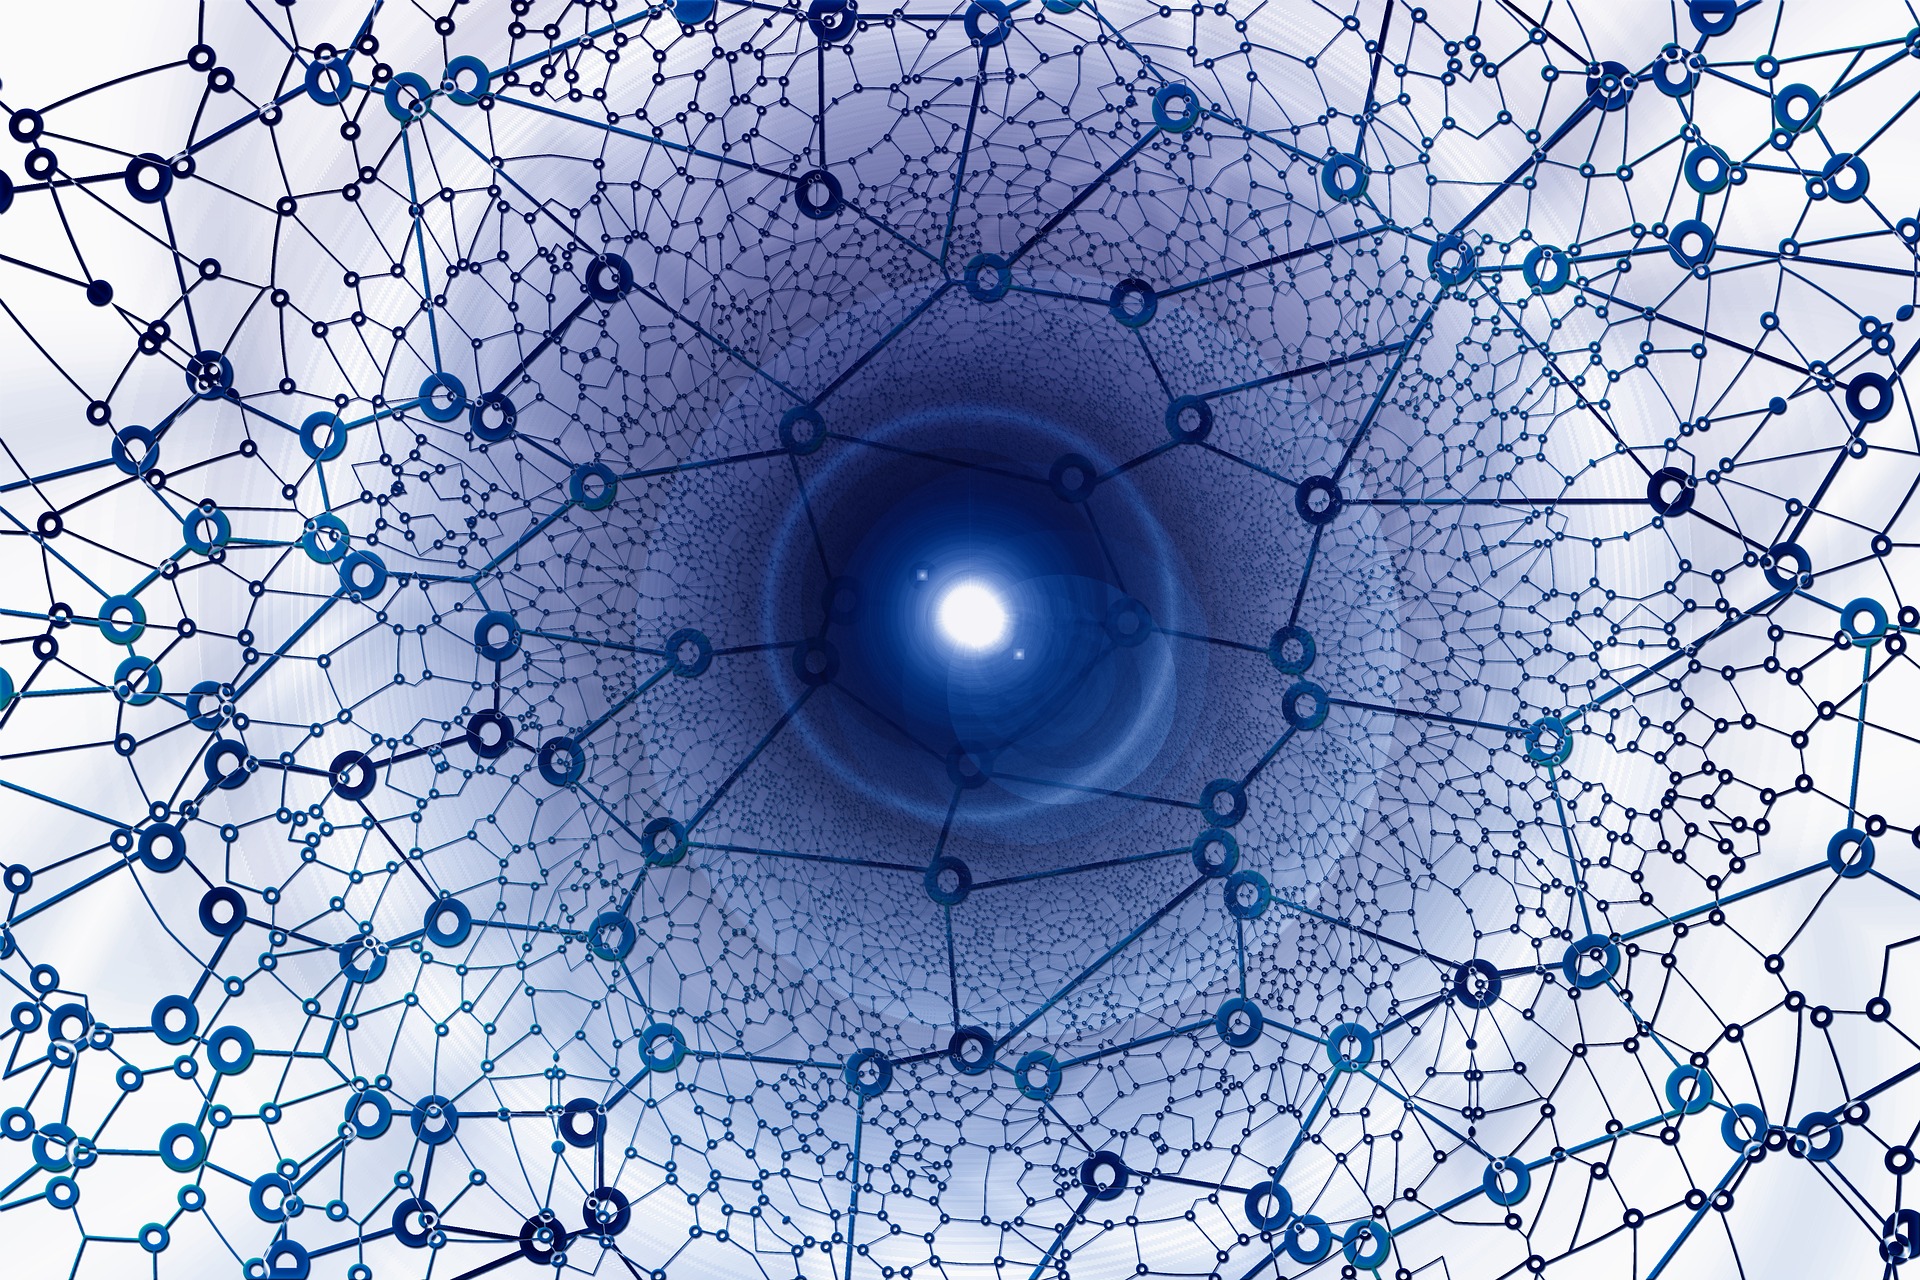 Abstract illustration of a network centred to a glowing orb. Image by Gerd Altmann from Pixabay|Quote from Mishal Kanoo, Chairman, The Kanoo Group: “The idea is to always try to find ways to make people feel that they are equal in terms of opportunity.